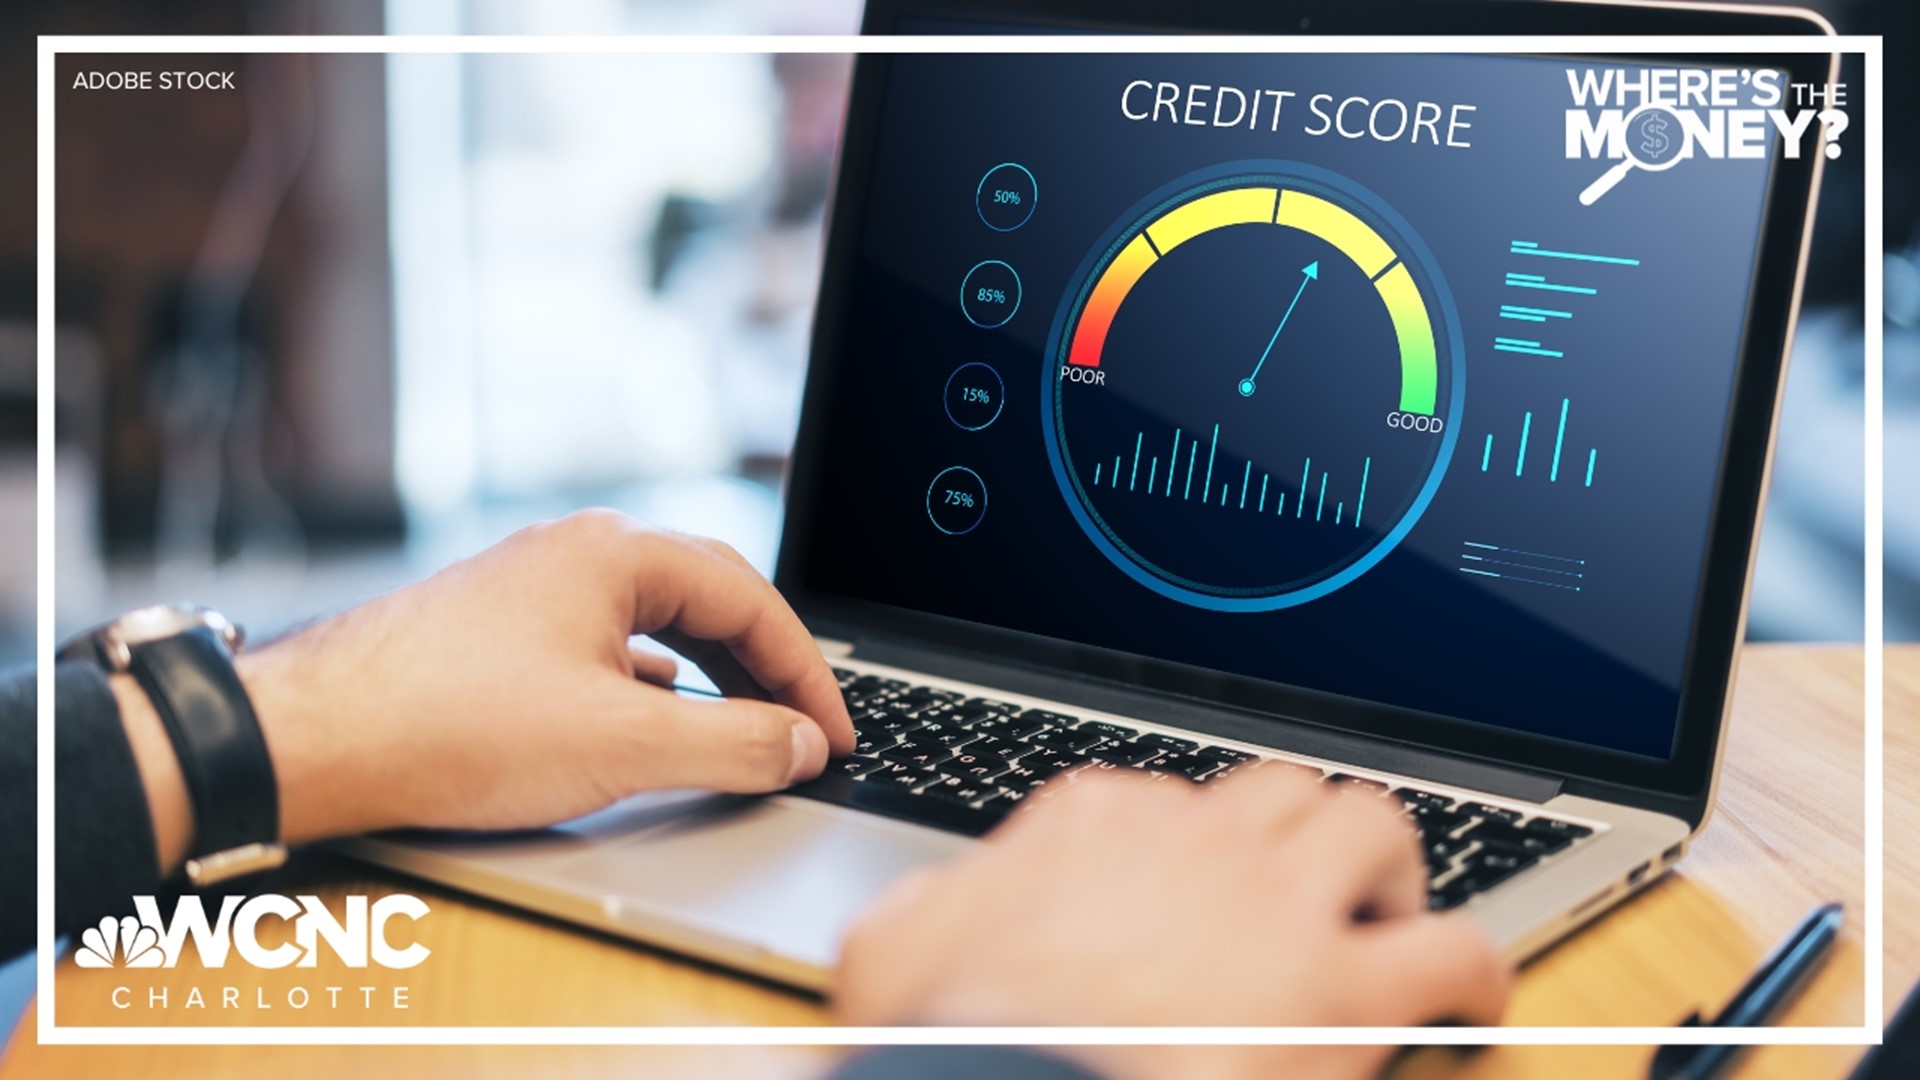 A report from the online magazine Money found the average credit score dropped for the first time since 2009.